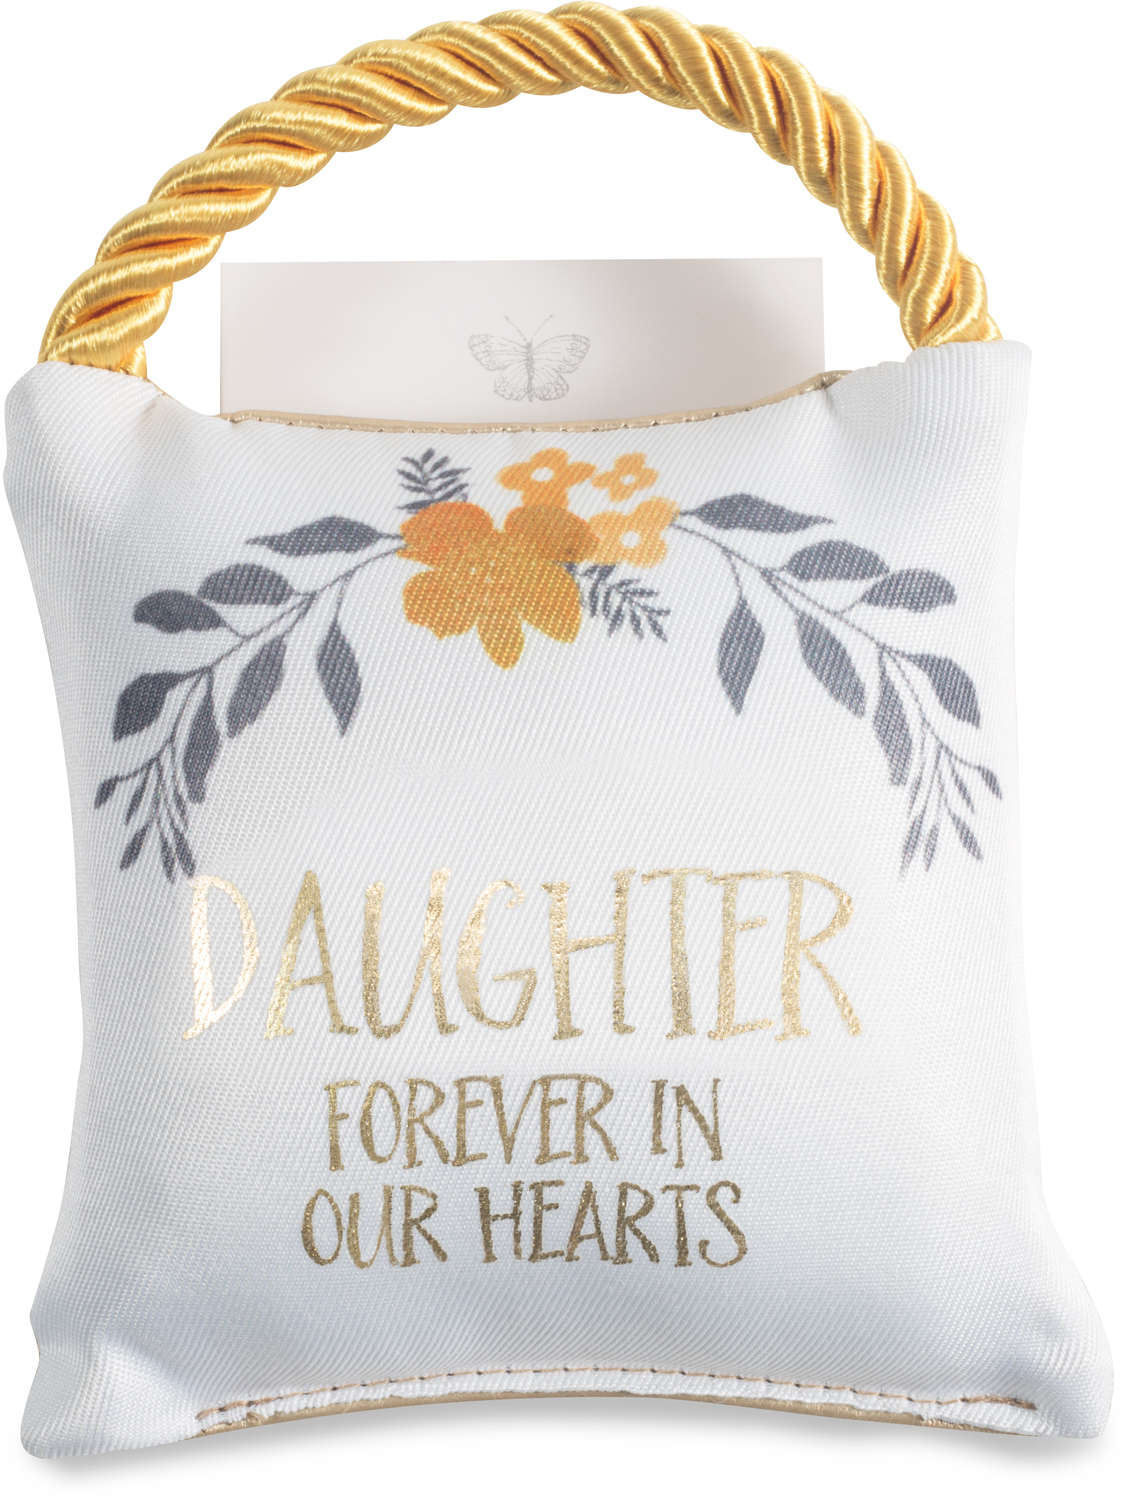 Daughter by Butterfly Whispers - Daughter - 4.5" Memorial Pocket Pillow